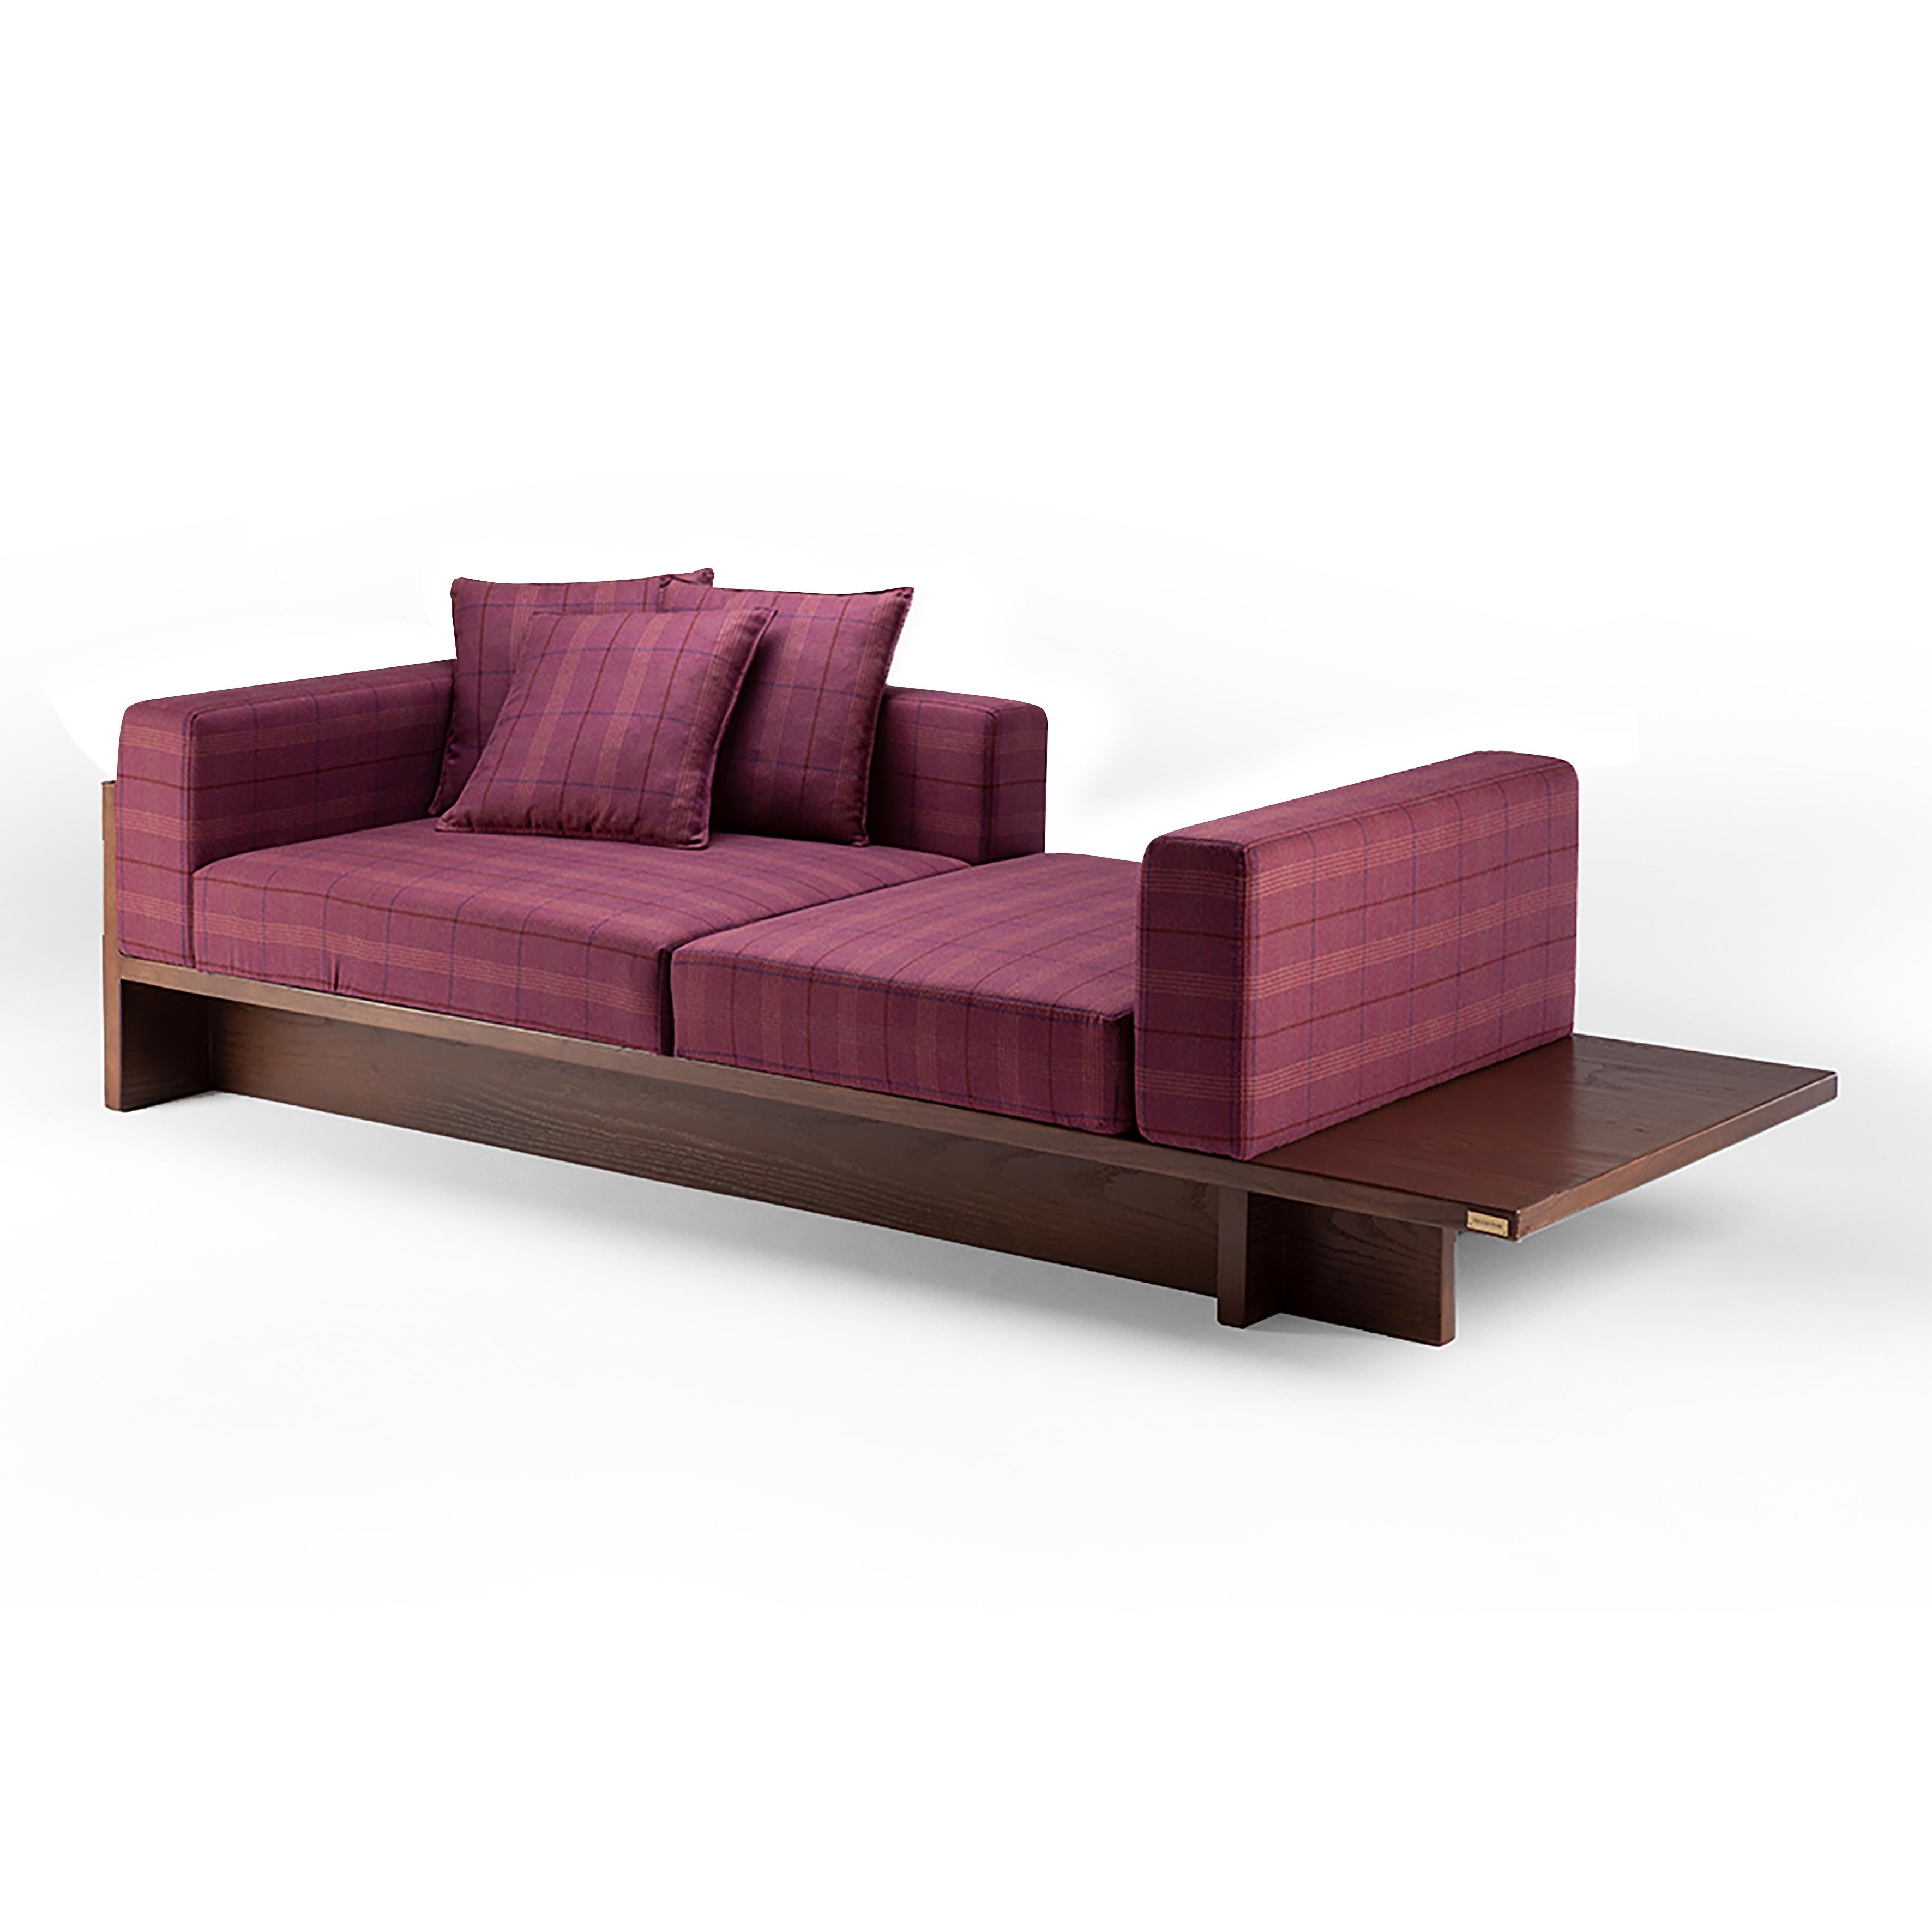 Contemporary Modern Chaplin Sofa in Bordeaux Fabric & Dark Oak by Collector Studio

With Chaplin sofa flexibility it is possible to have different methods of use, from different configuration options to chaise longue, his simple geometry and